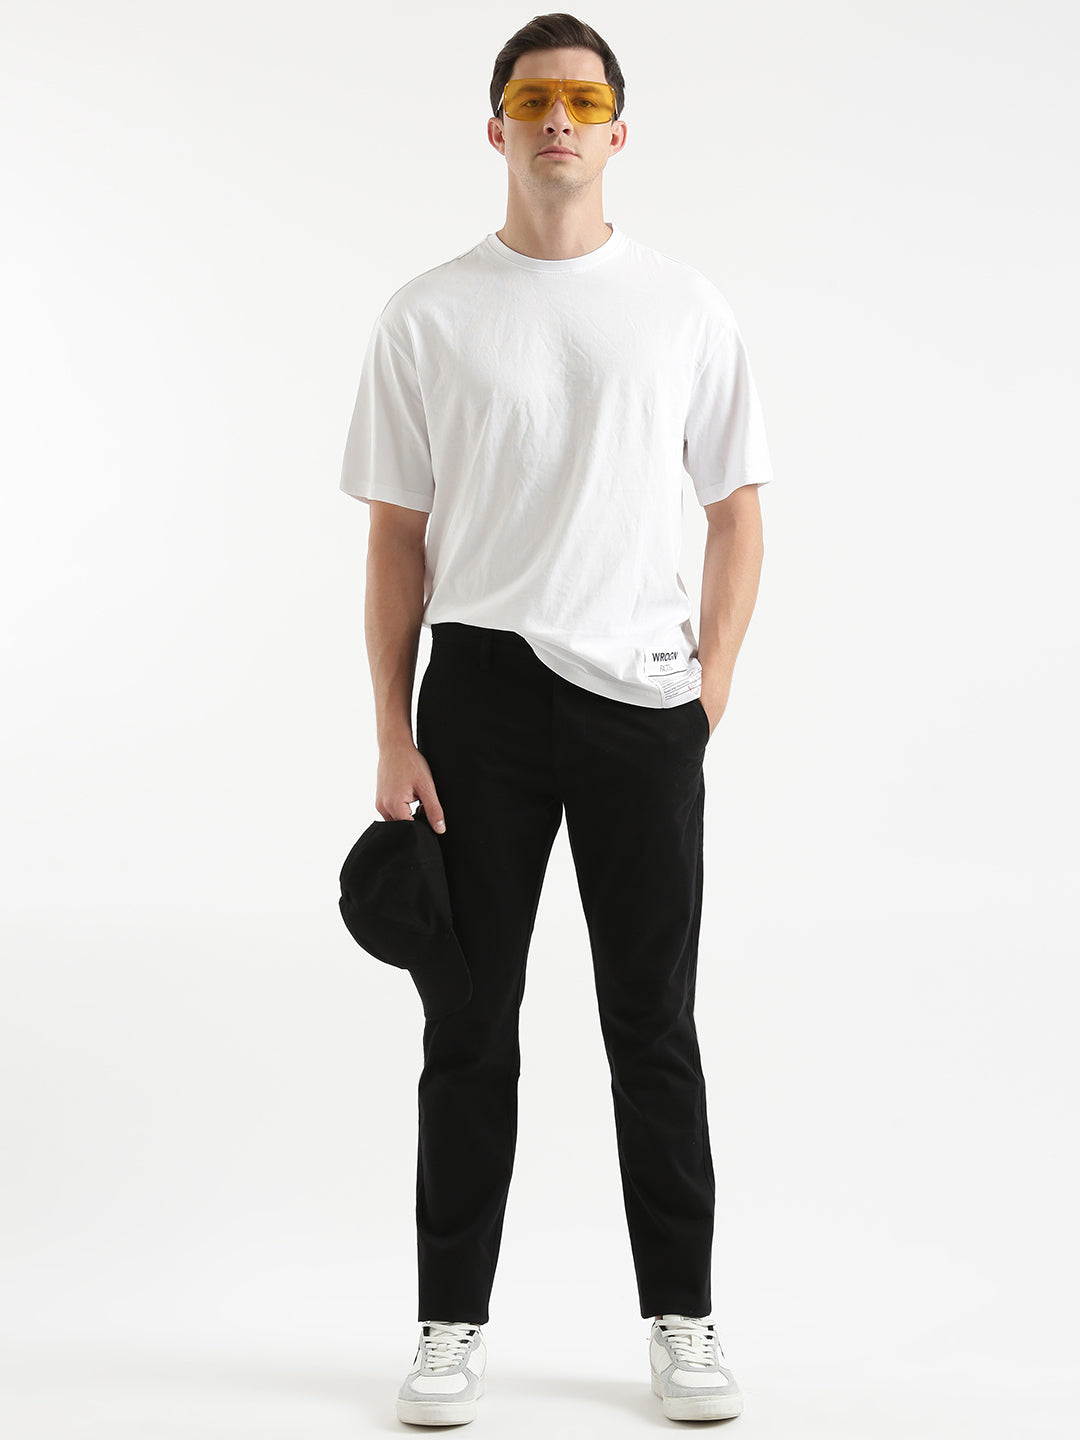 Classic Solid Pant